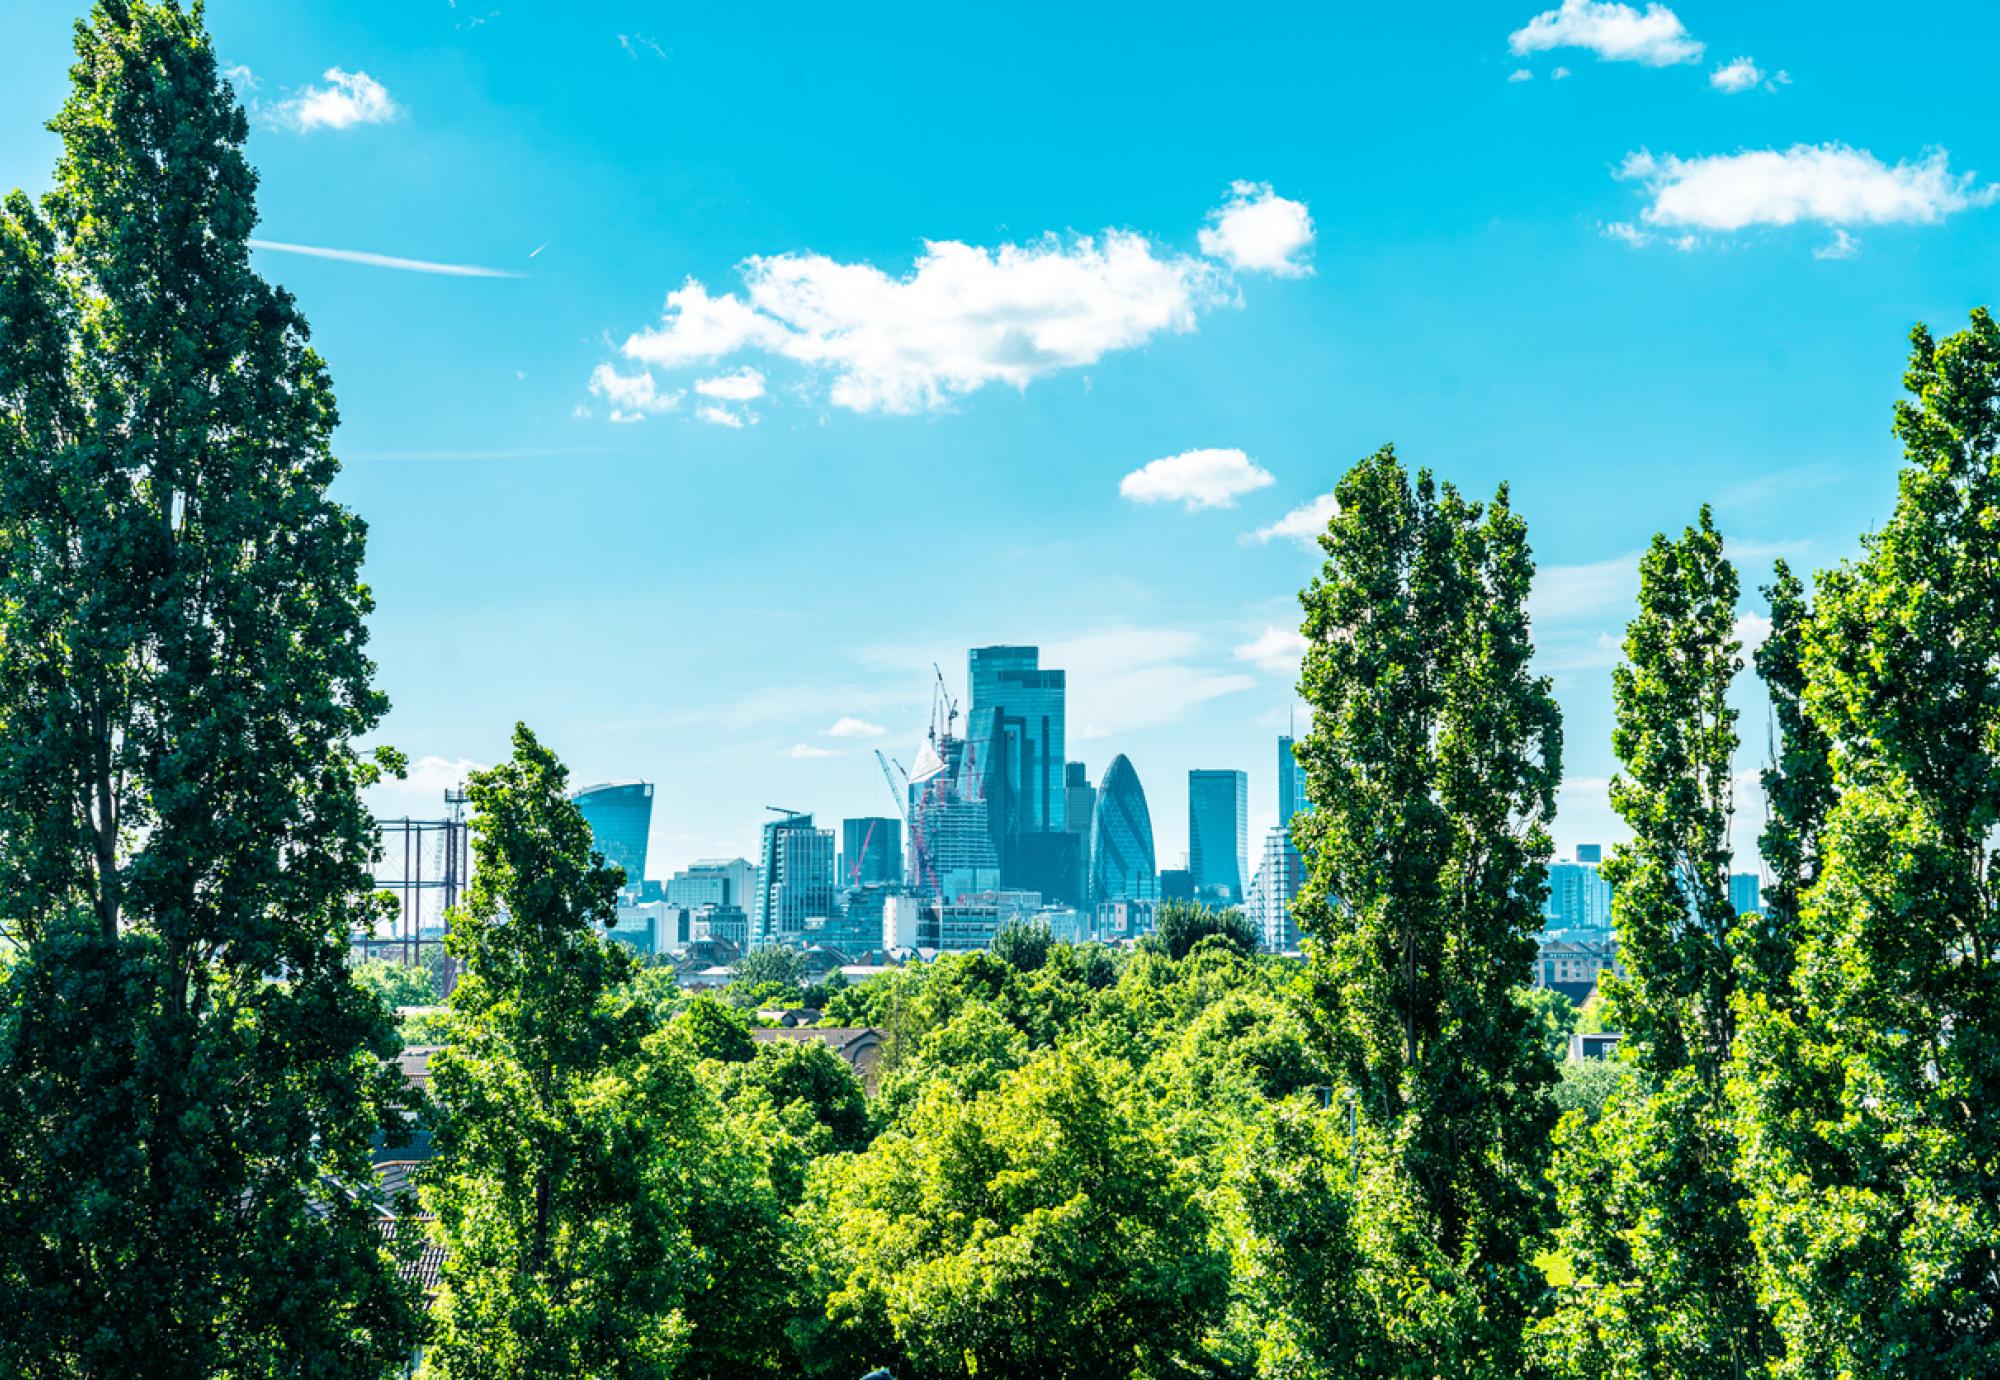 View of the City of London skyline through some trees